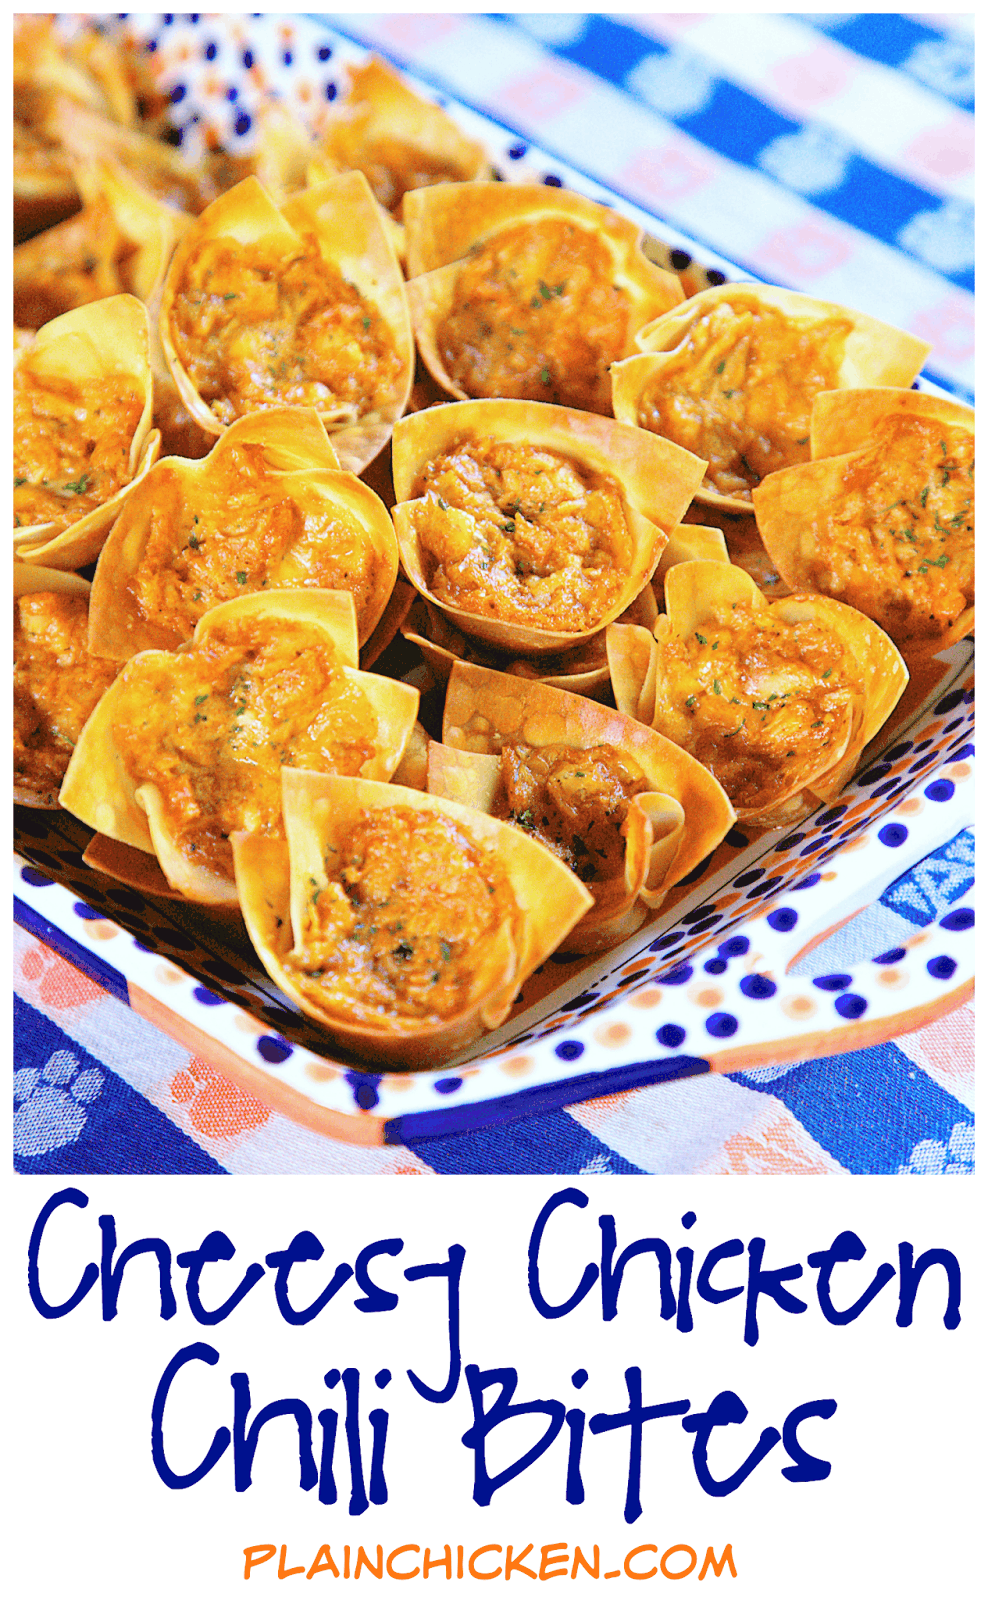 Cheesy Chicken Chili Bites - only 5 ingredients! Chicken, chili seasoning, ranch, cheese baked in wonton wrappers. I ate way too many of these!! SO good. Can make filling ahead of time and refrigerate. Great for parties and tailgates. Tastes great warm or at room temperature.